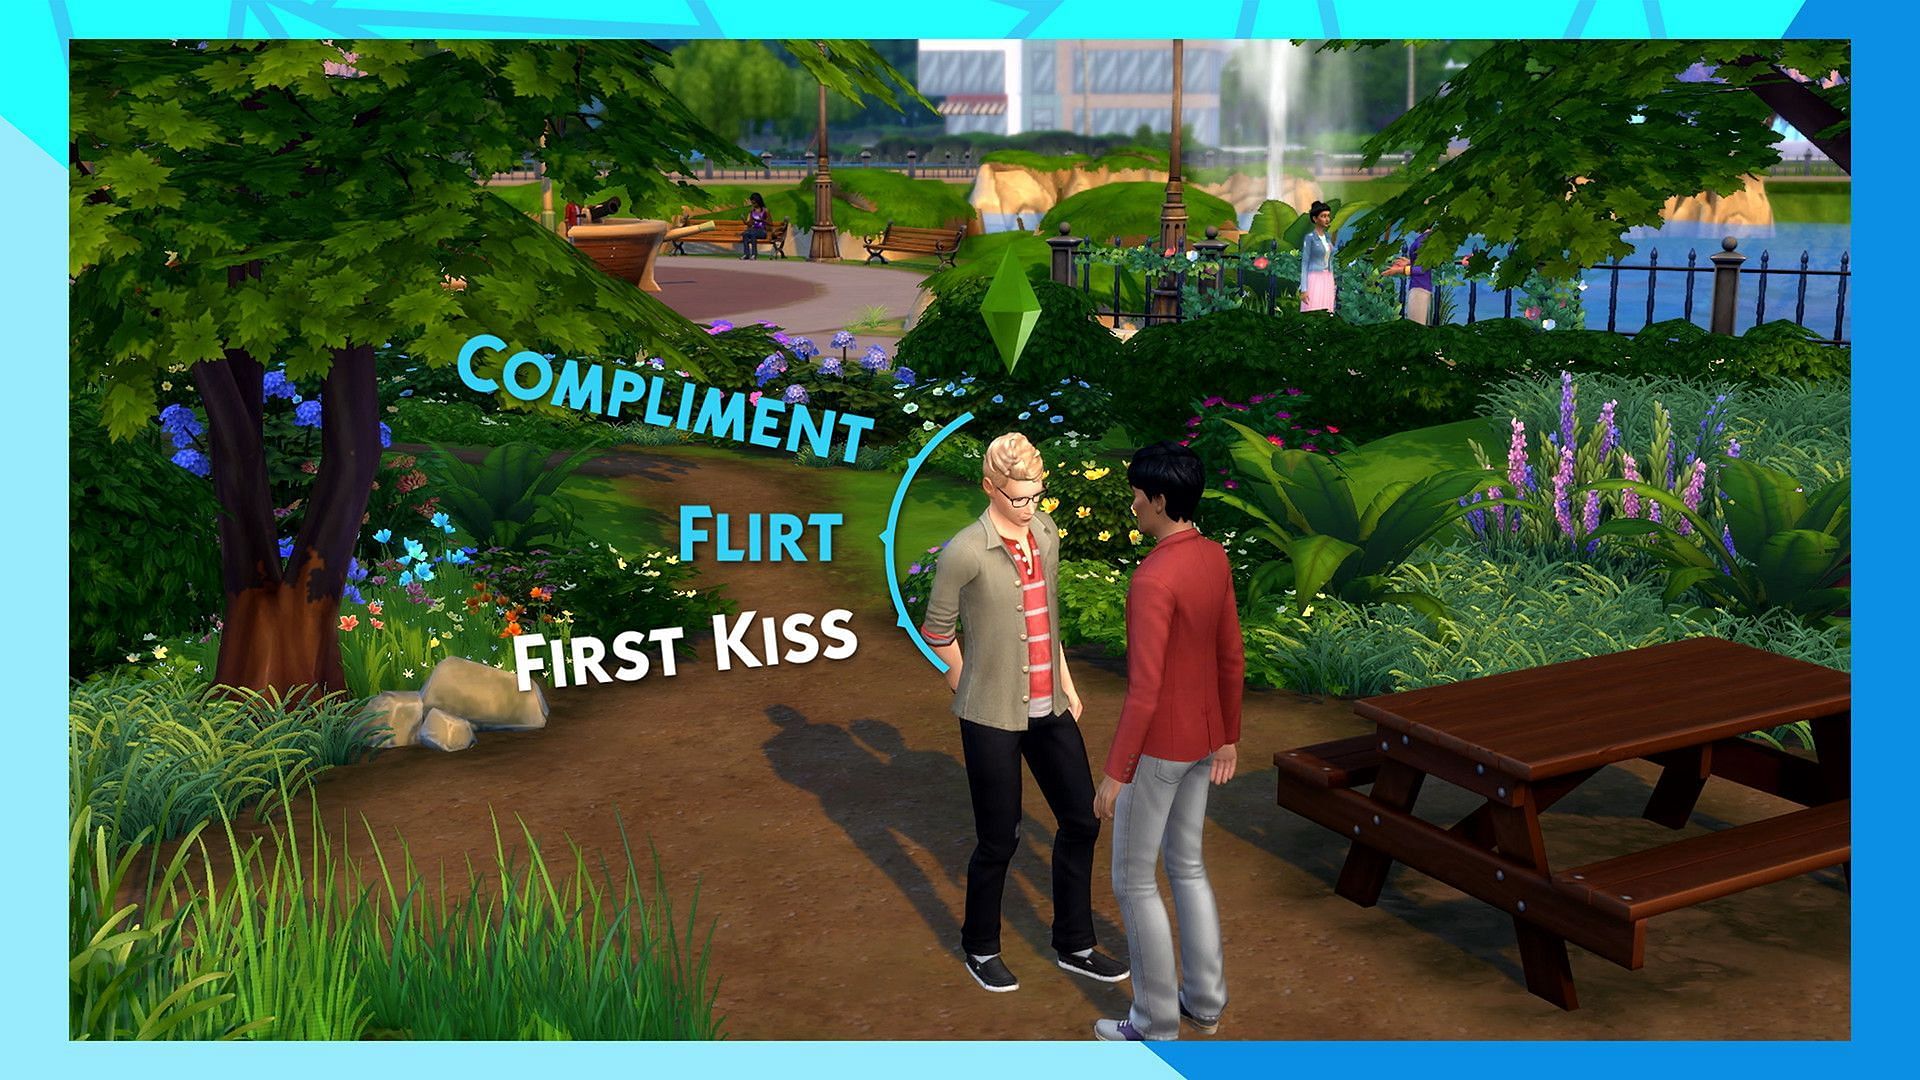 Adult sims need more socialization gameplay features in Sims 4 (Image via Electronic Arts)